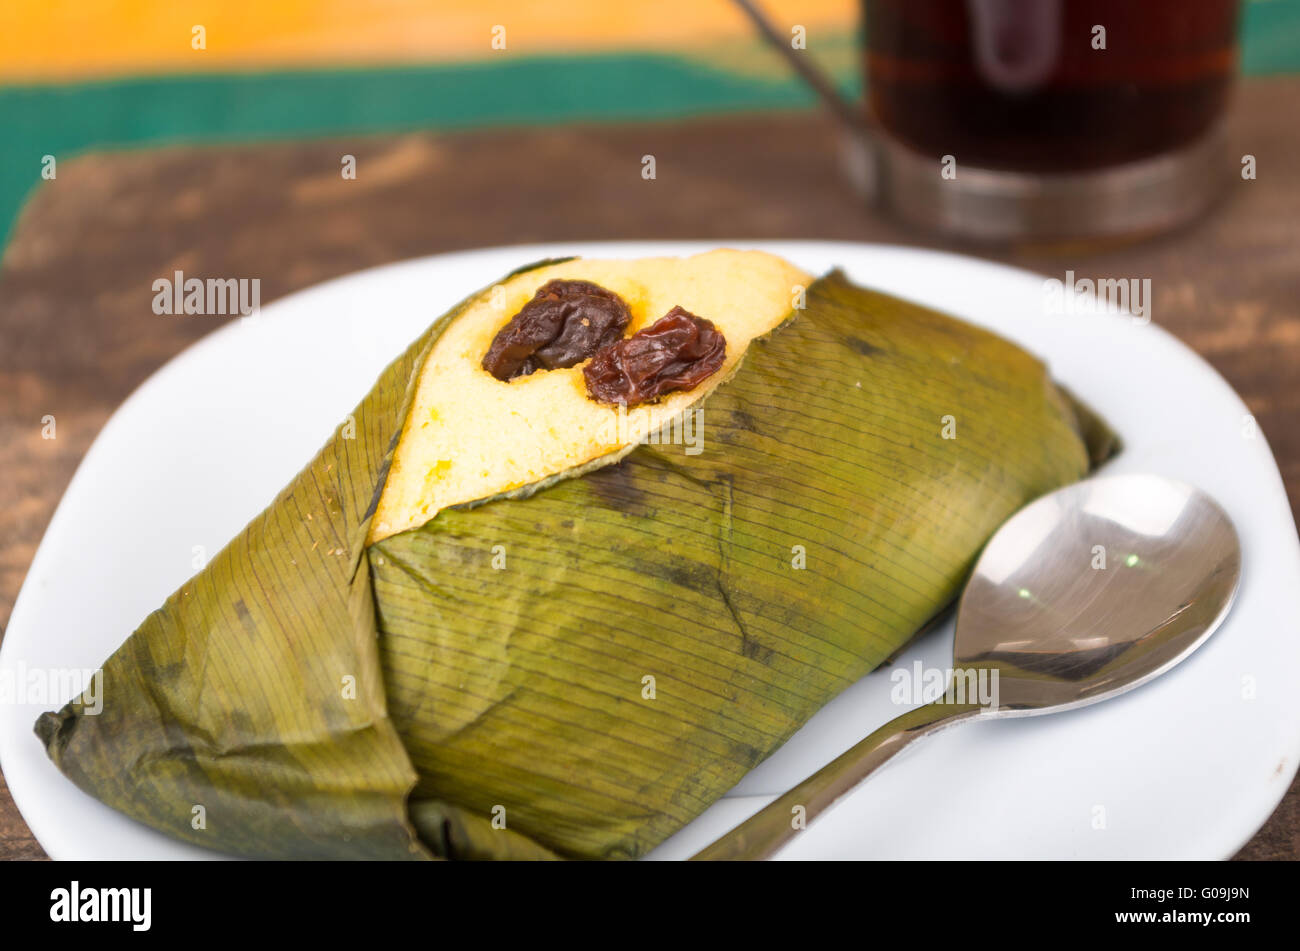 Delicious sweet rough with raisins wrapped in achira leaf served on a white dish, quimbolito Stock Photo